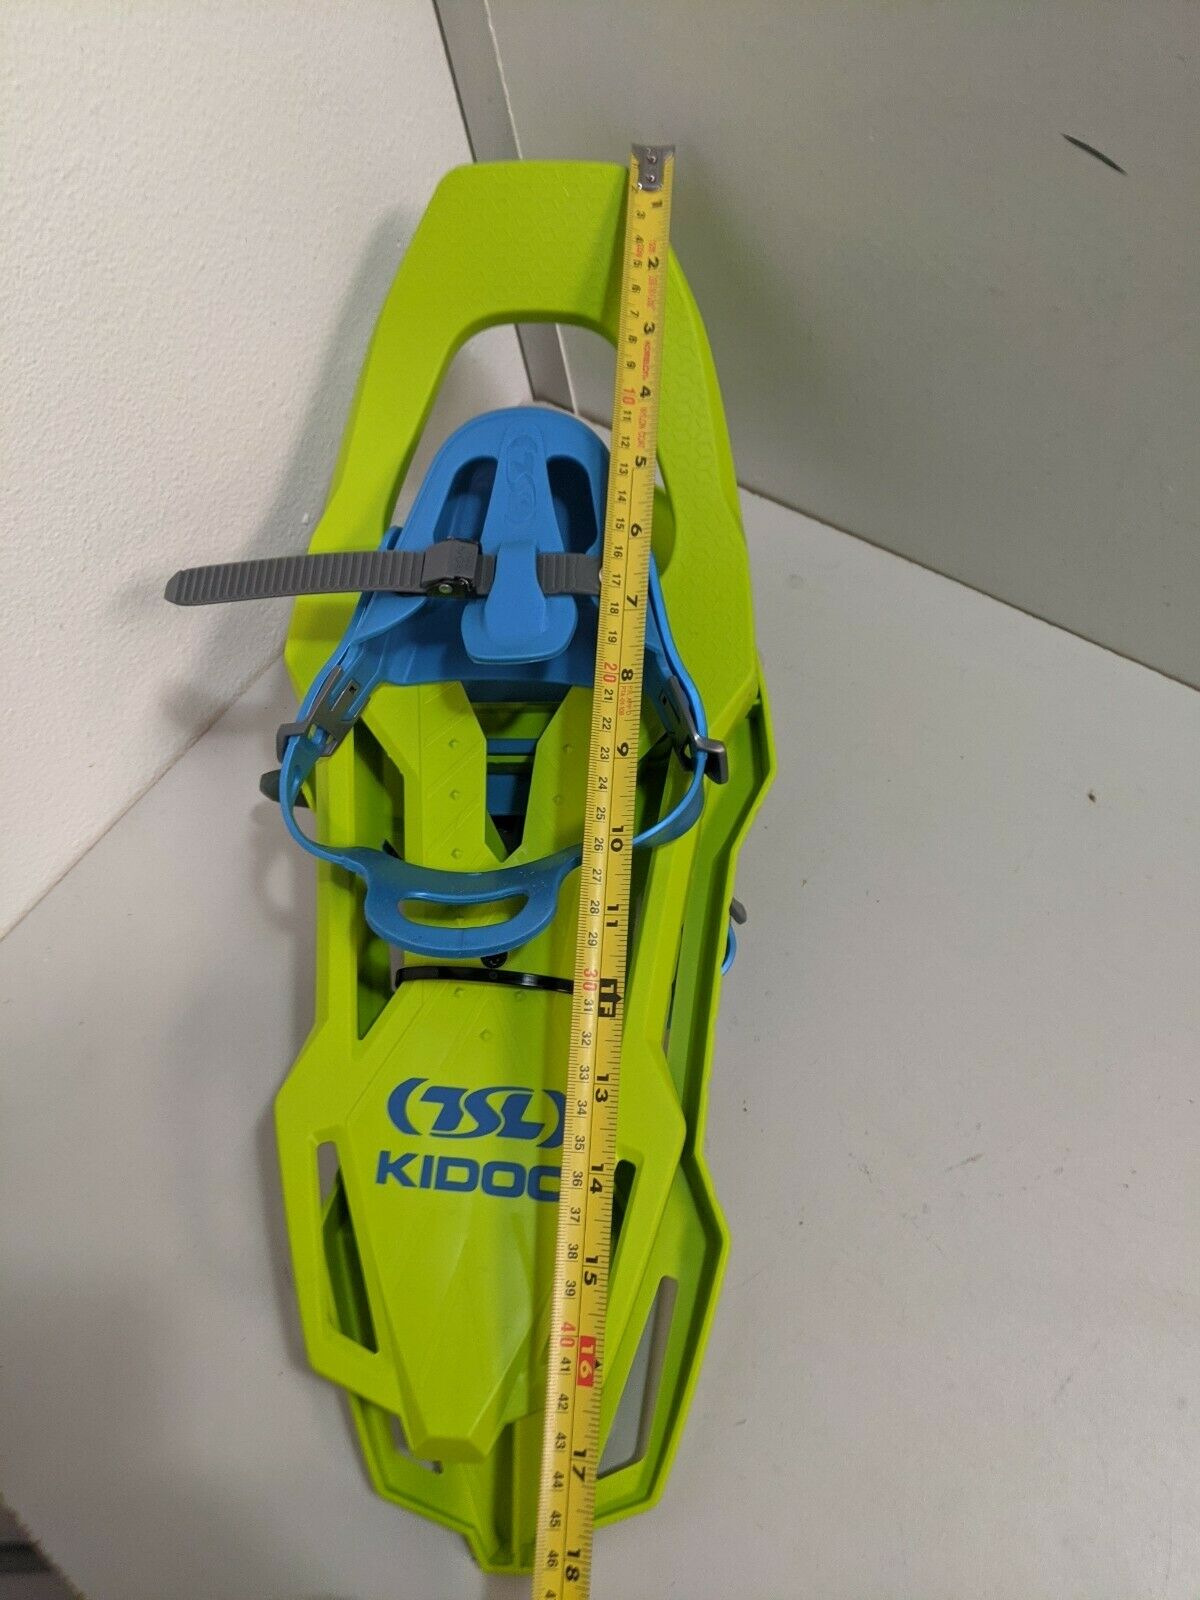 TSL Kidoo Snow Shoes 17-in Color Kiwi Youth New Without Bag, Shoe Size Girls 12.5 - 4 Boy, 65LB Max, 30 LB Min